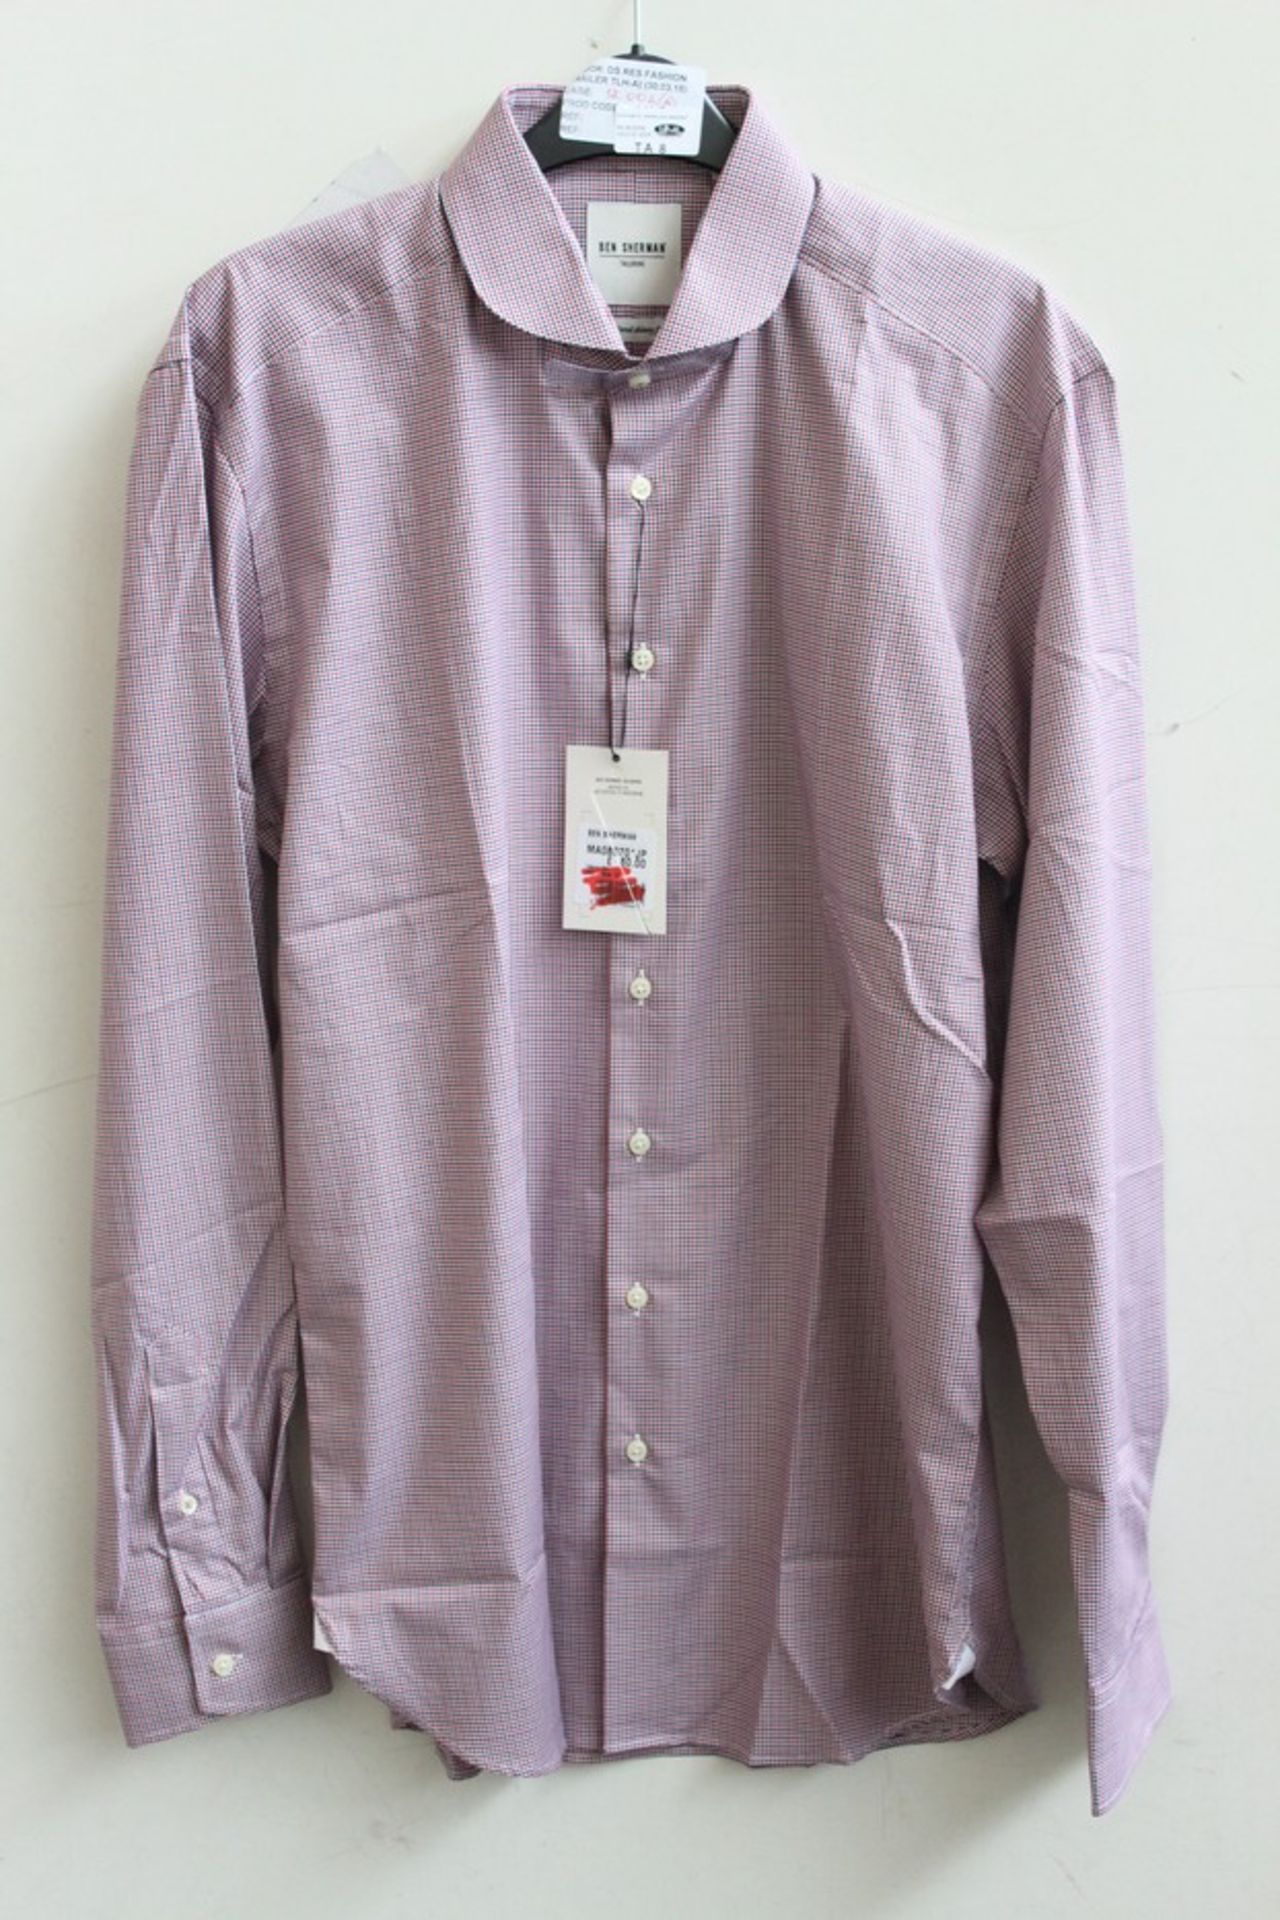 ONE BRAND NEW BEN SHERMAN SHIRT SIZE 15 RRP £80 (DS RES FASHION TRAILER TLH-A CAGE 12.006A